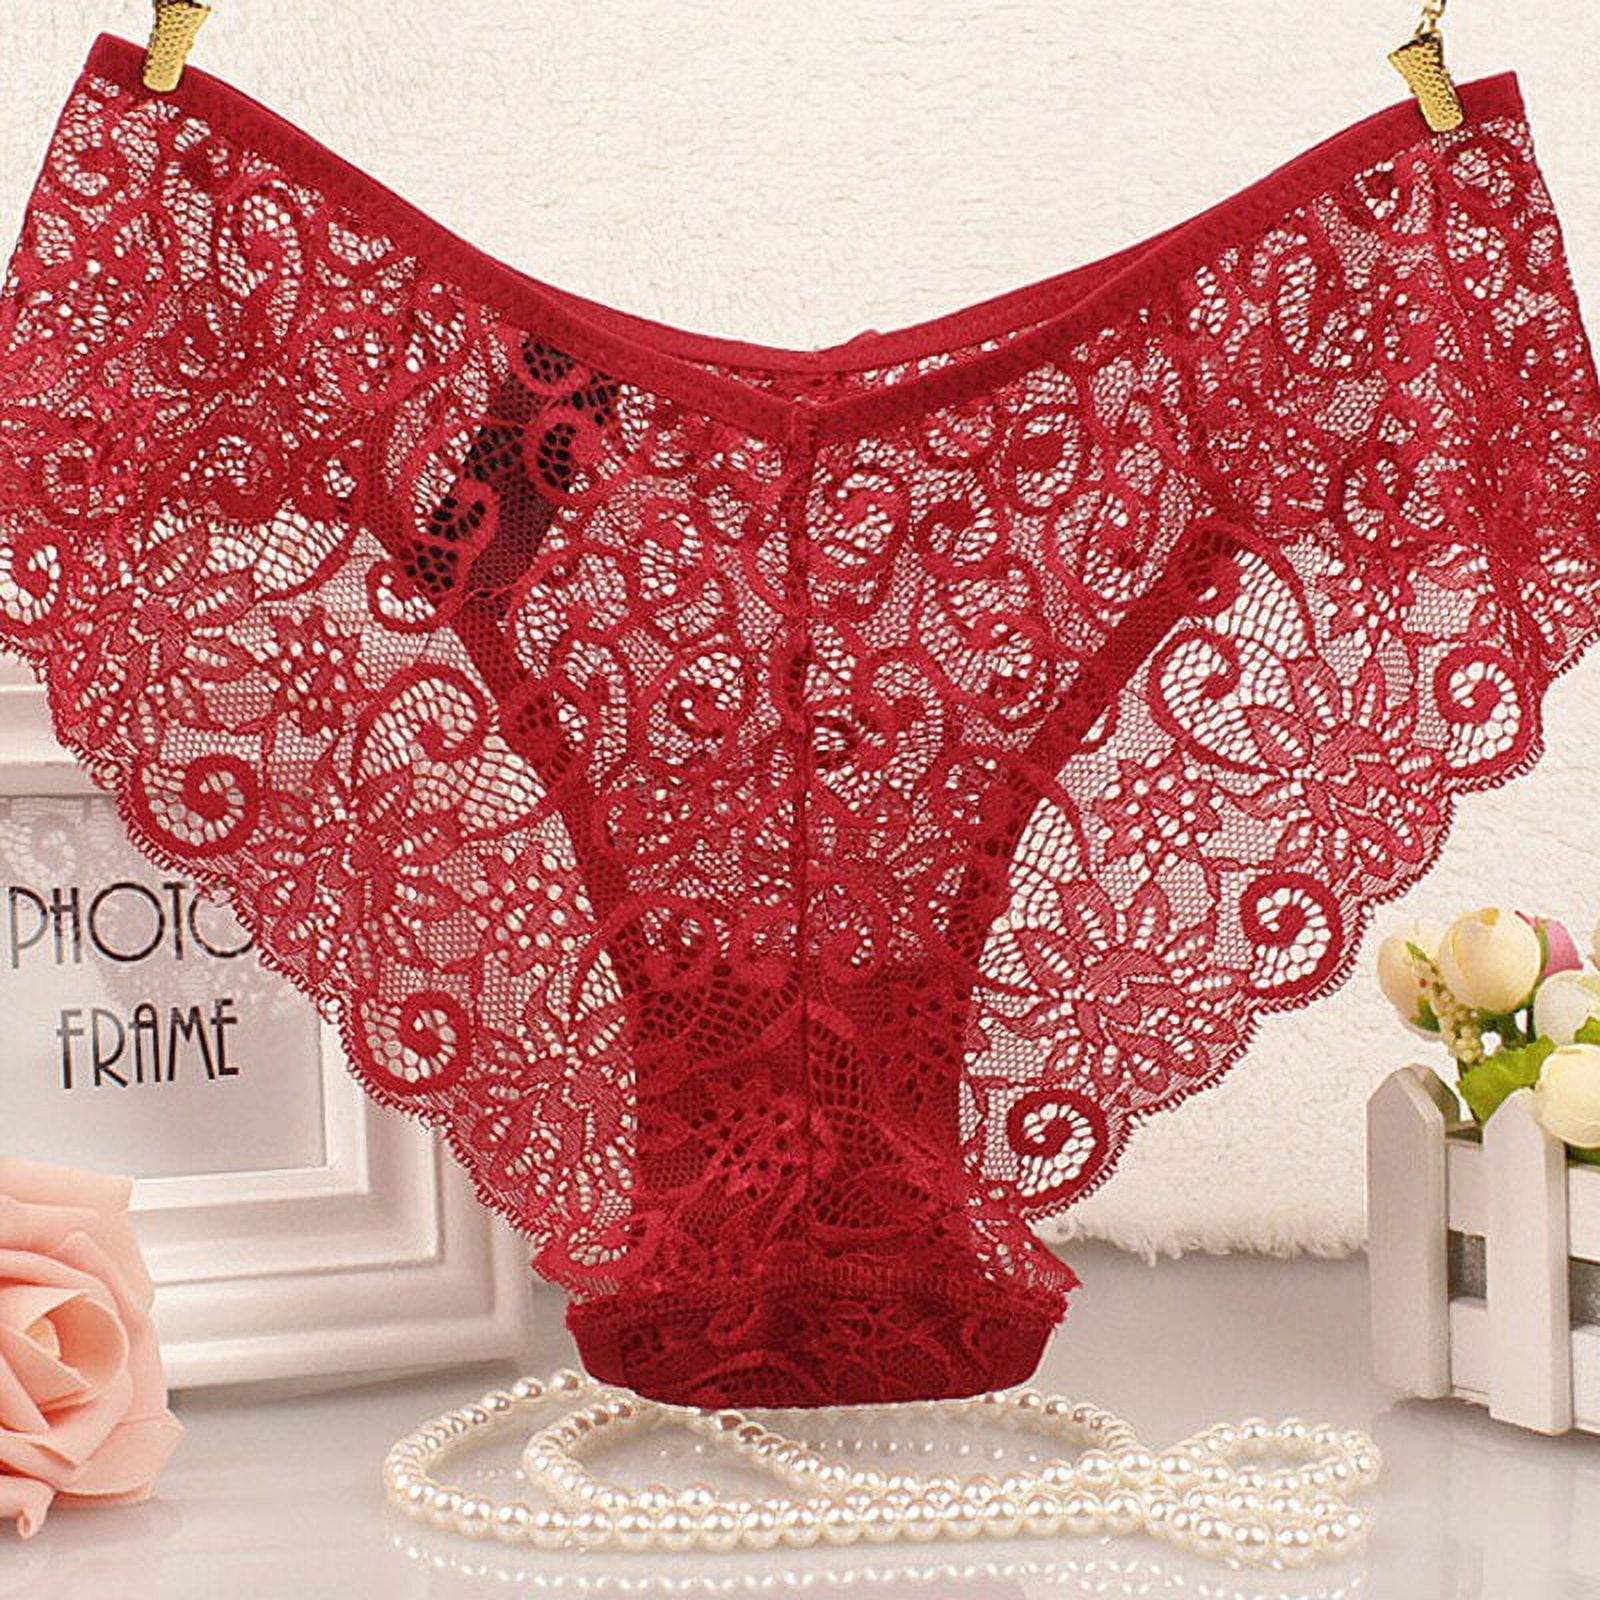 Women Underwear Brief Sexy Lace Bow Thong Panties Transparent 3